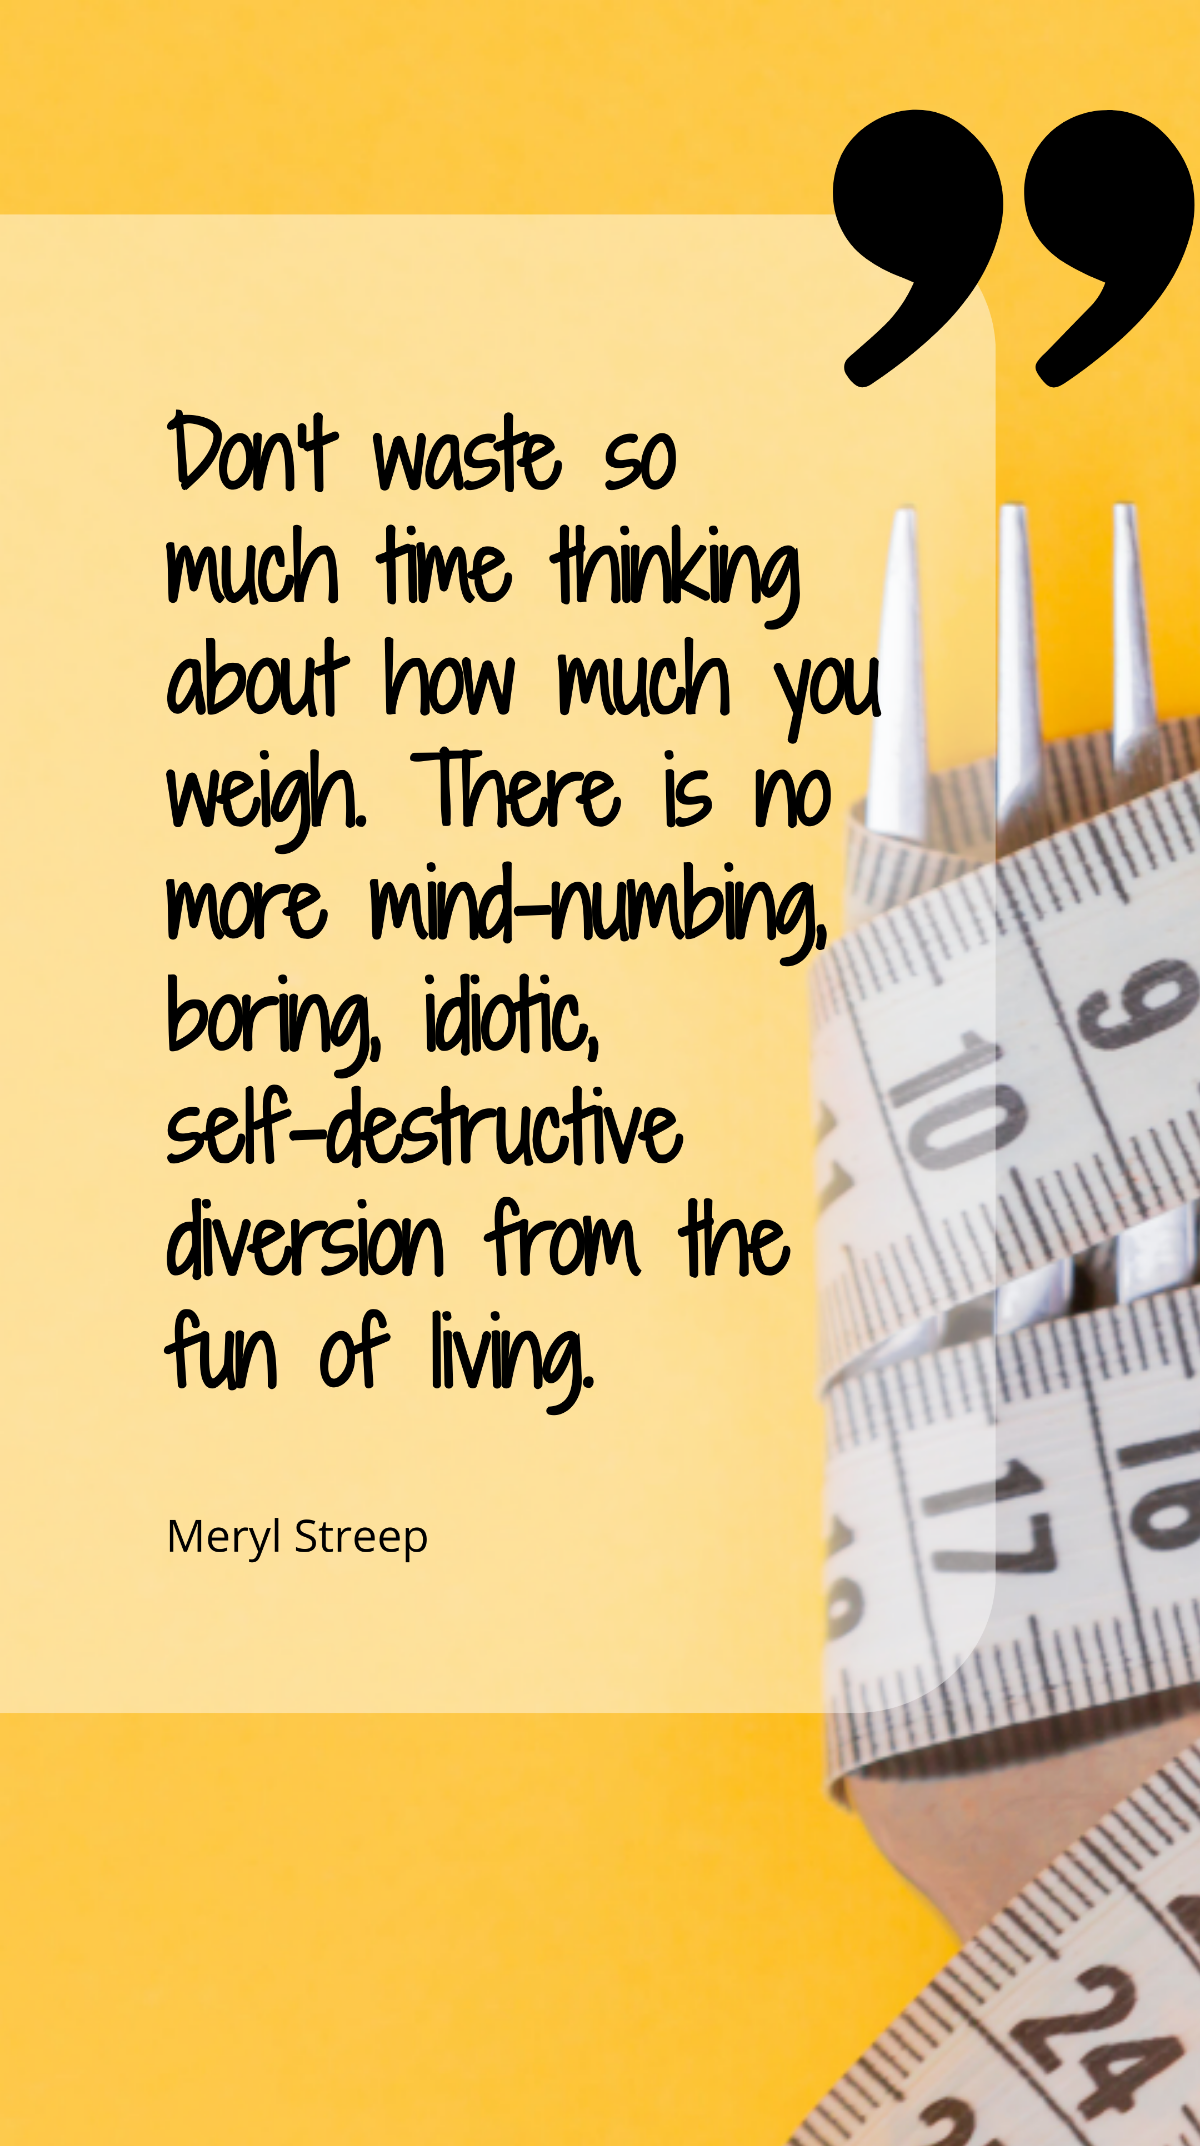 Meryl Streep - Don’t waste so much time thinking about how much you weigh. There is no more mind-numbing, boring, idiotic, self-destructive diversion from the fun of living. Template